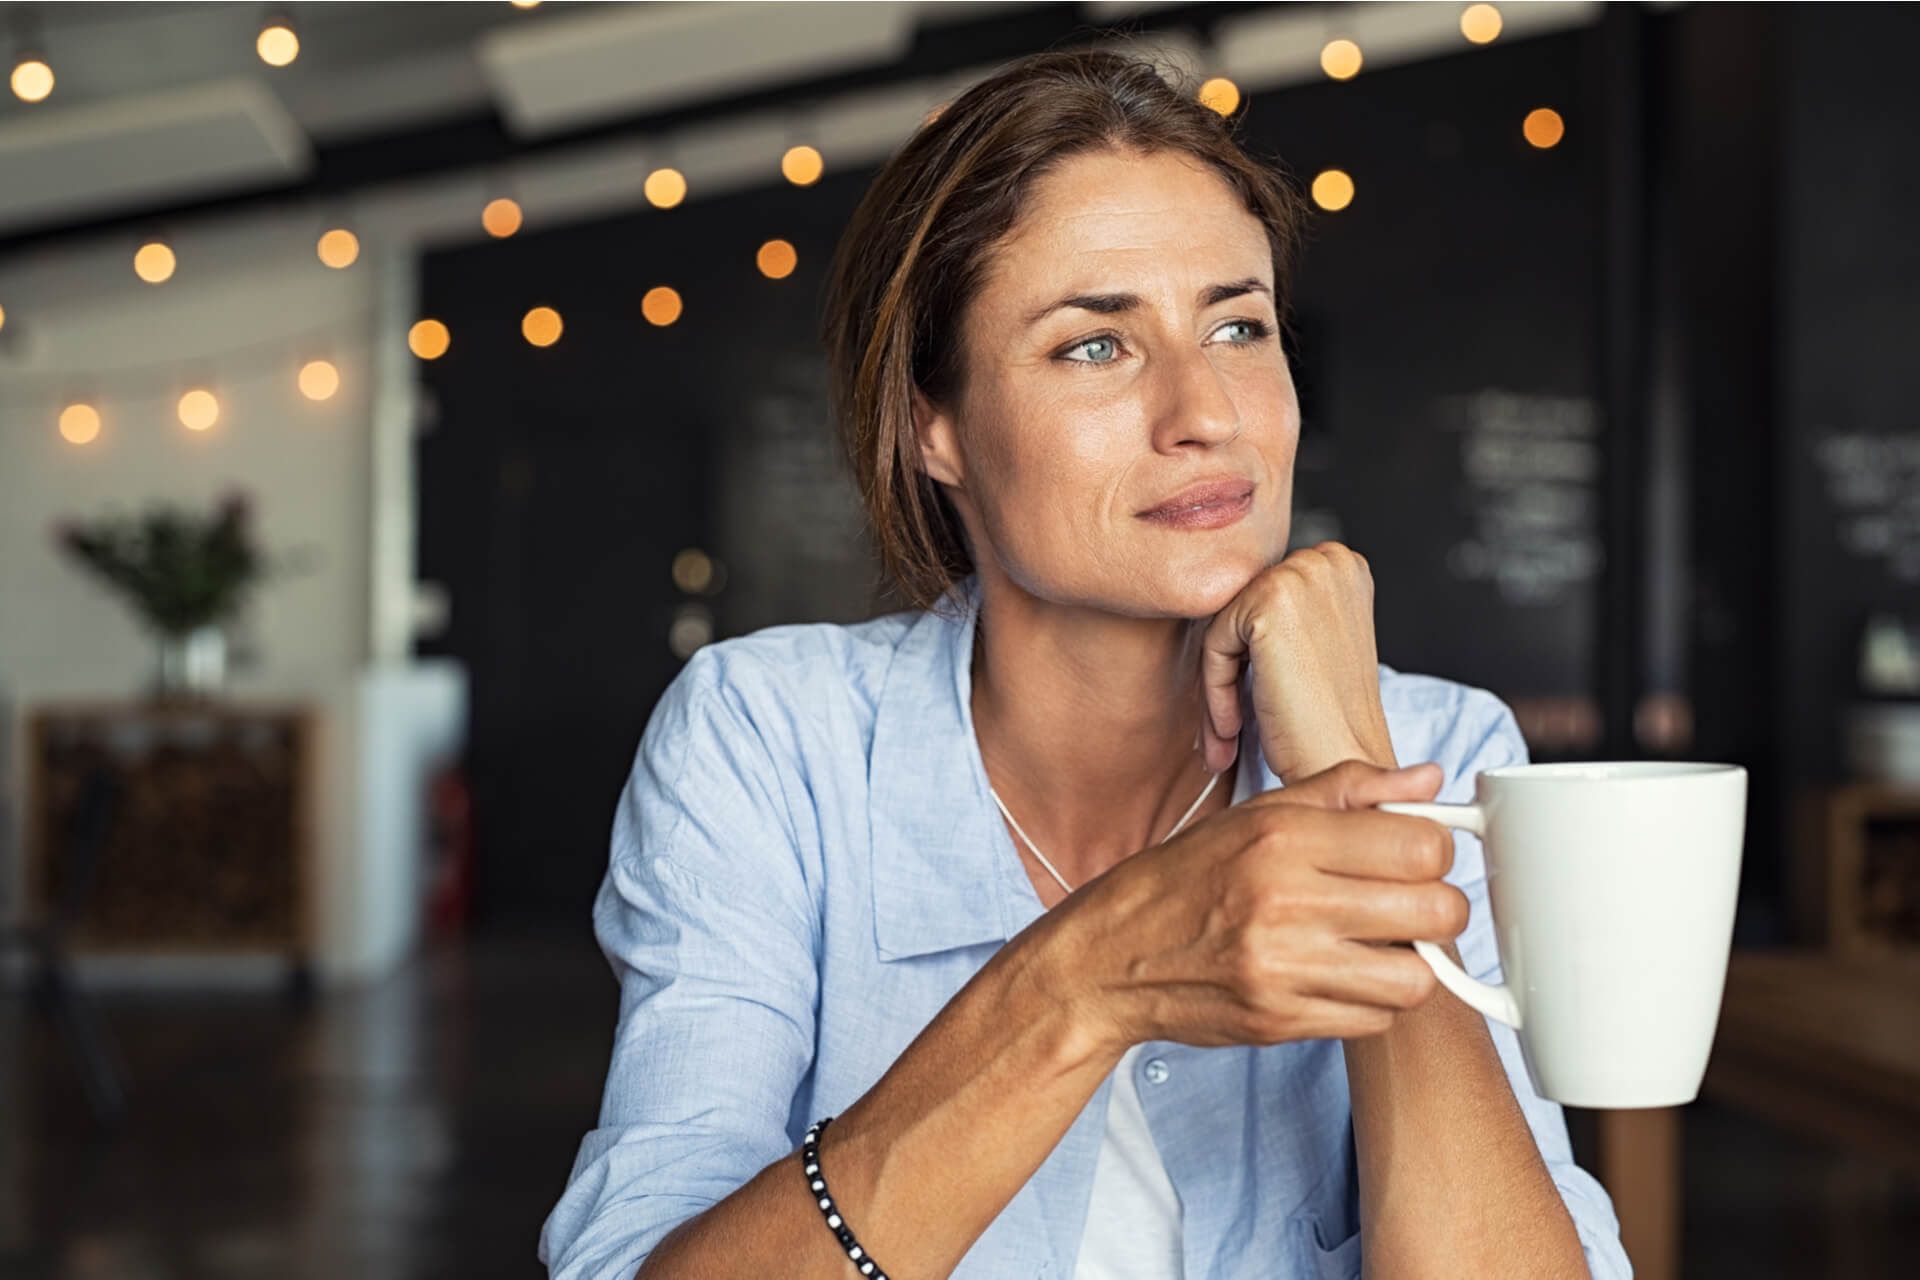 Thoughtful mature woman sitting in cafeteria holding coffee mug